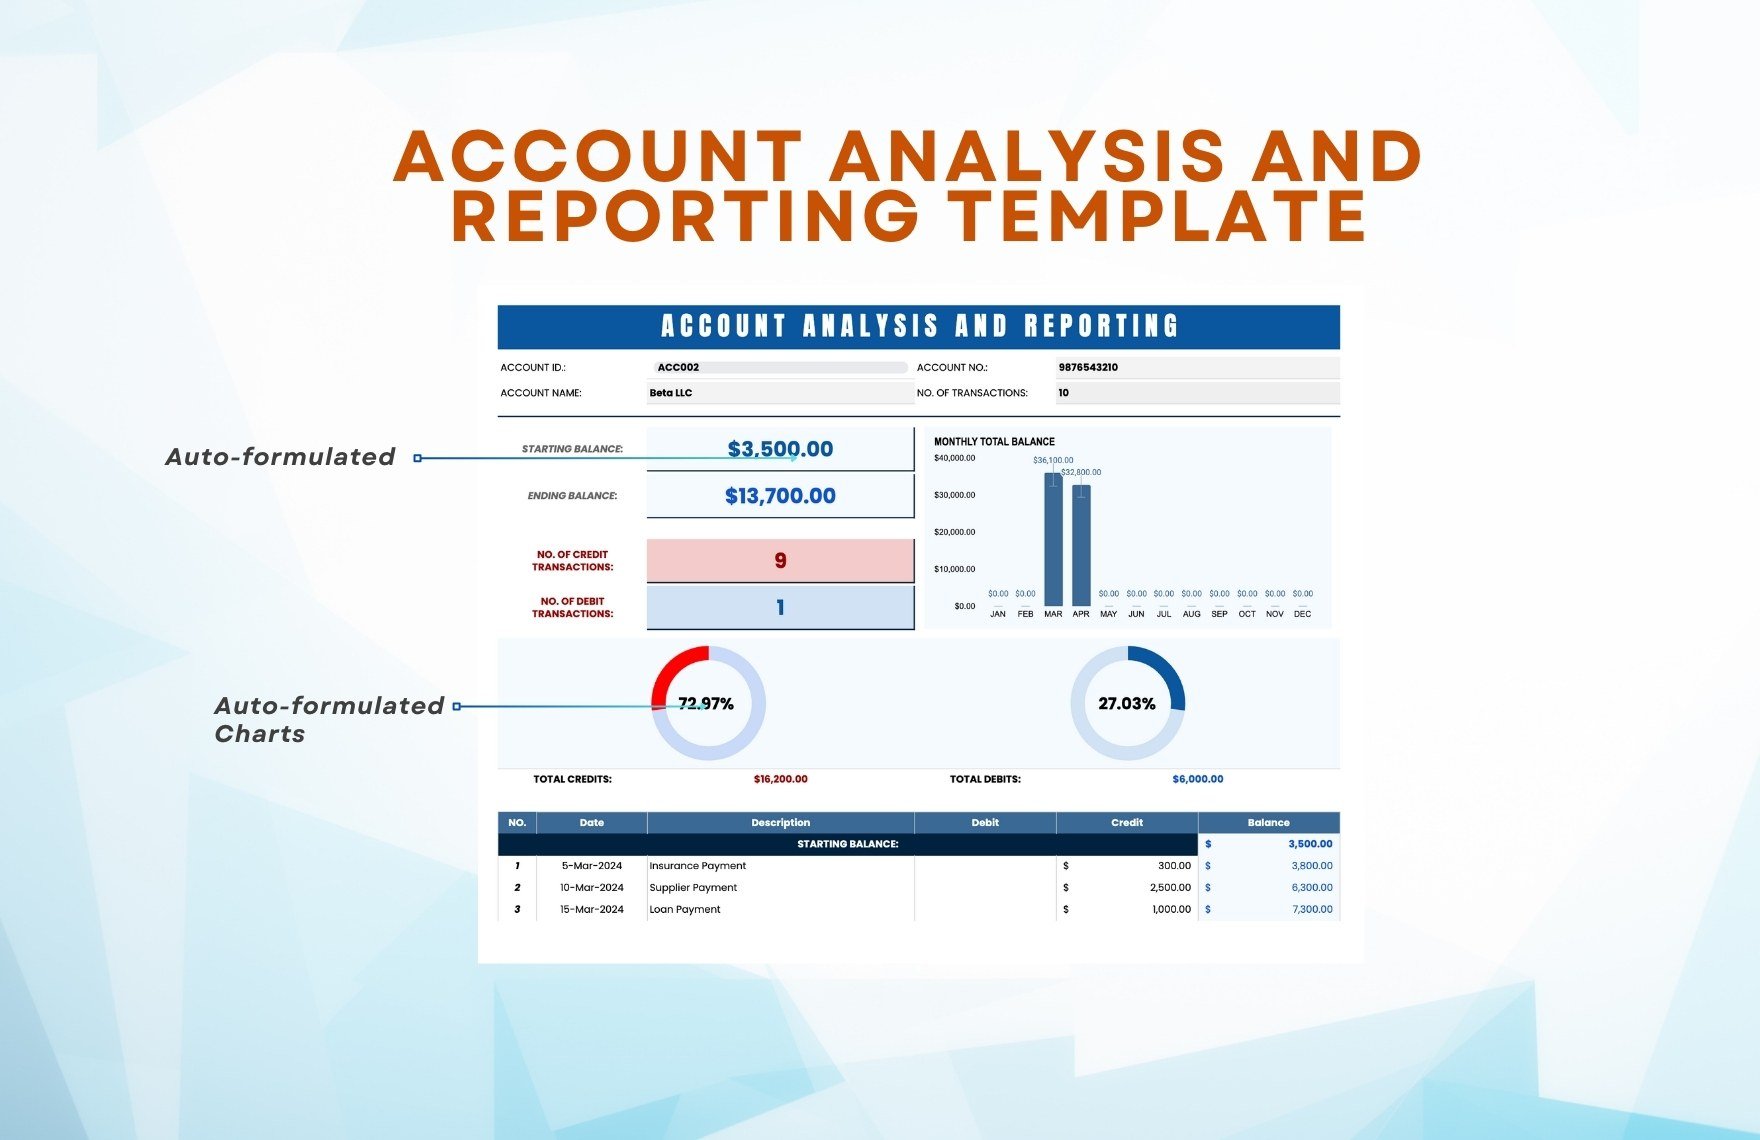 Account Analysis and Reporting Template